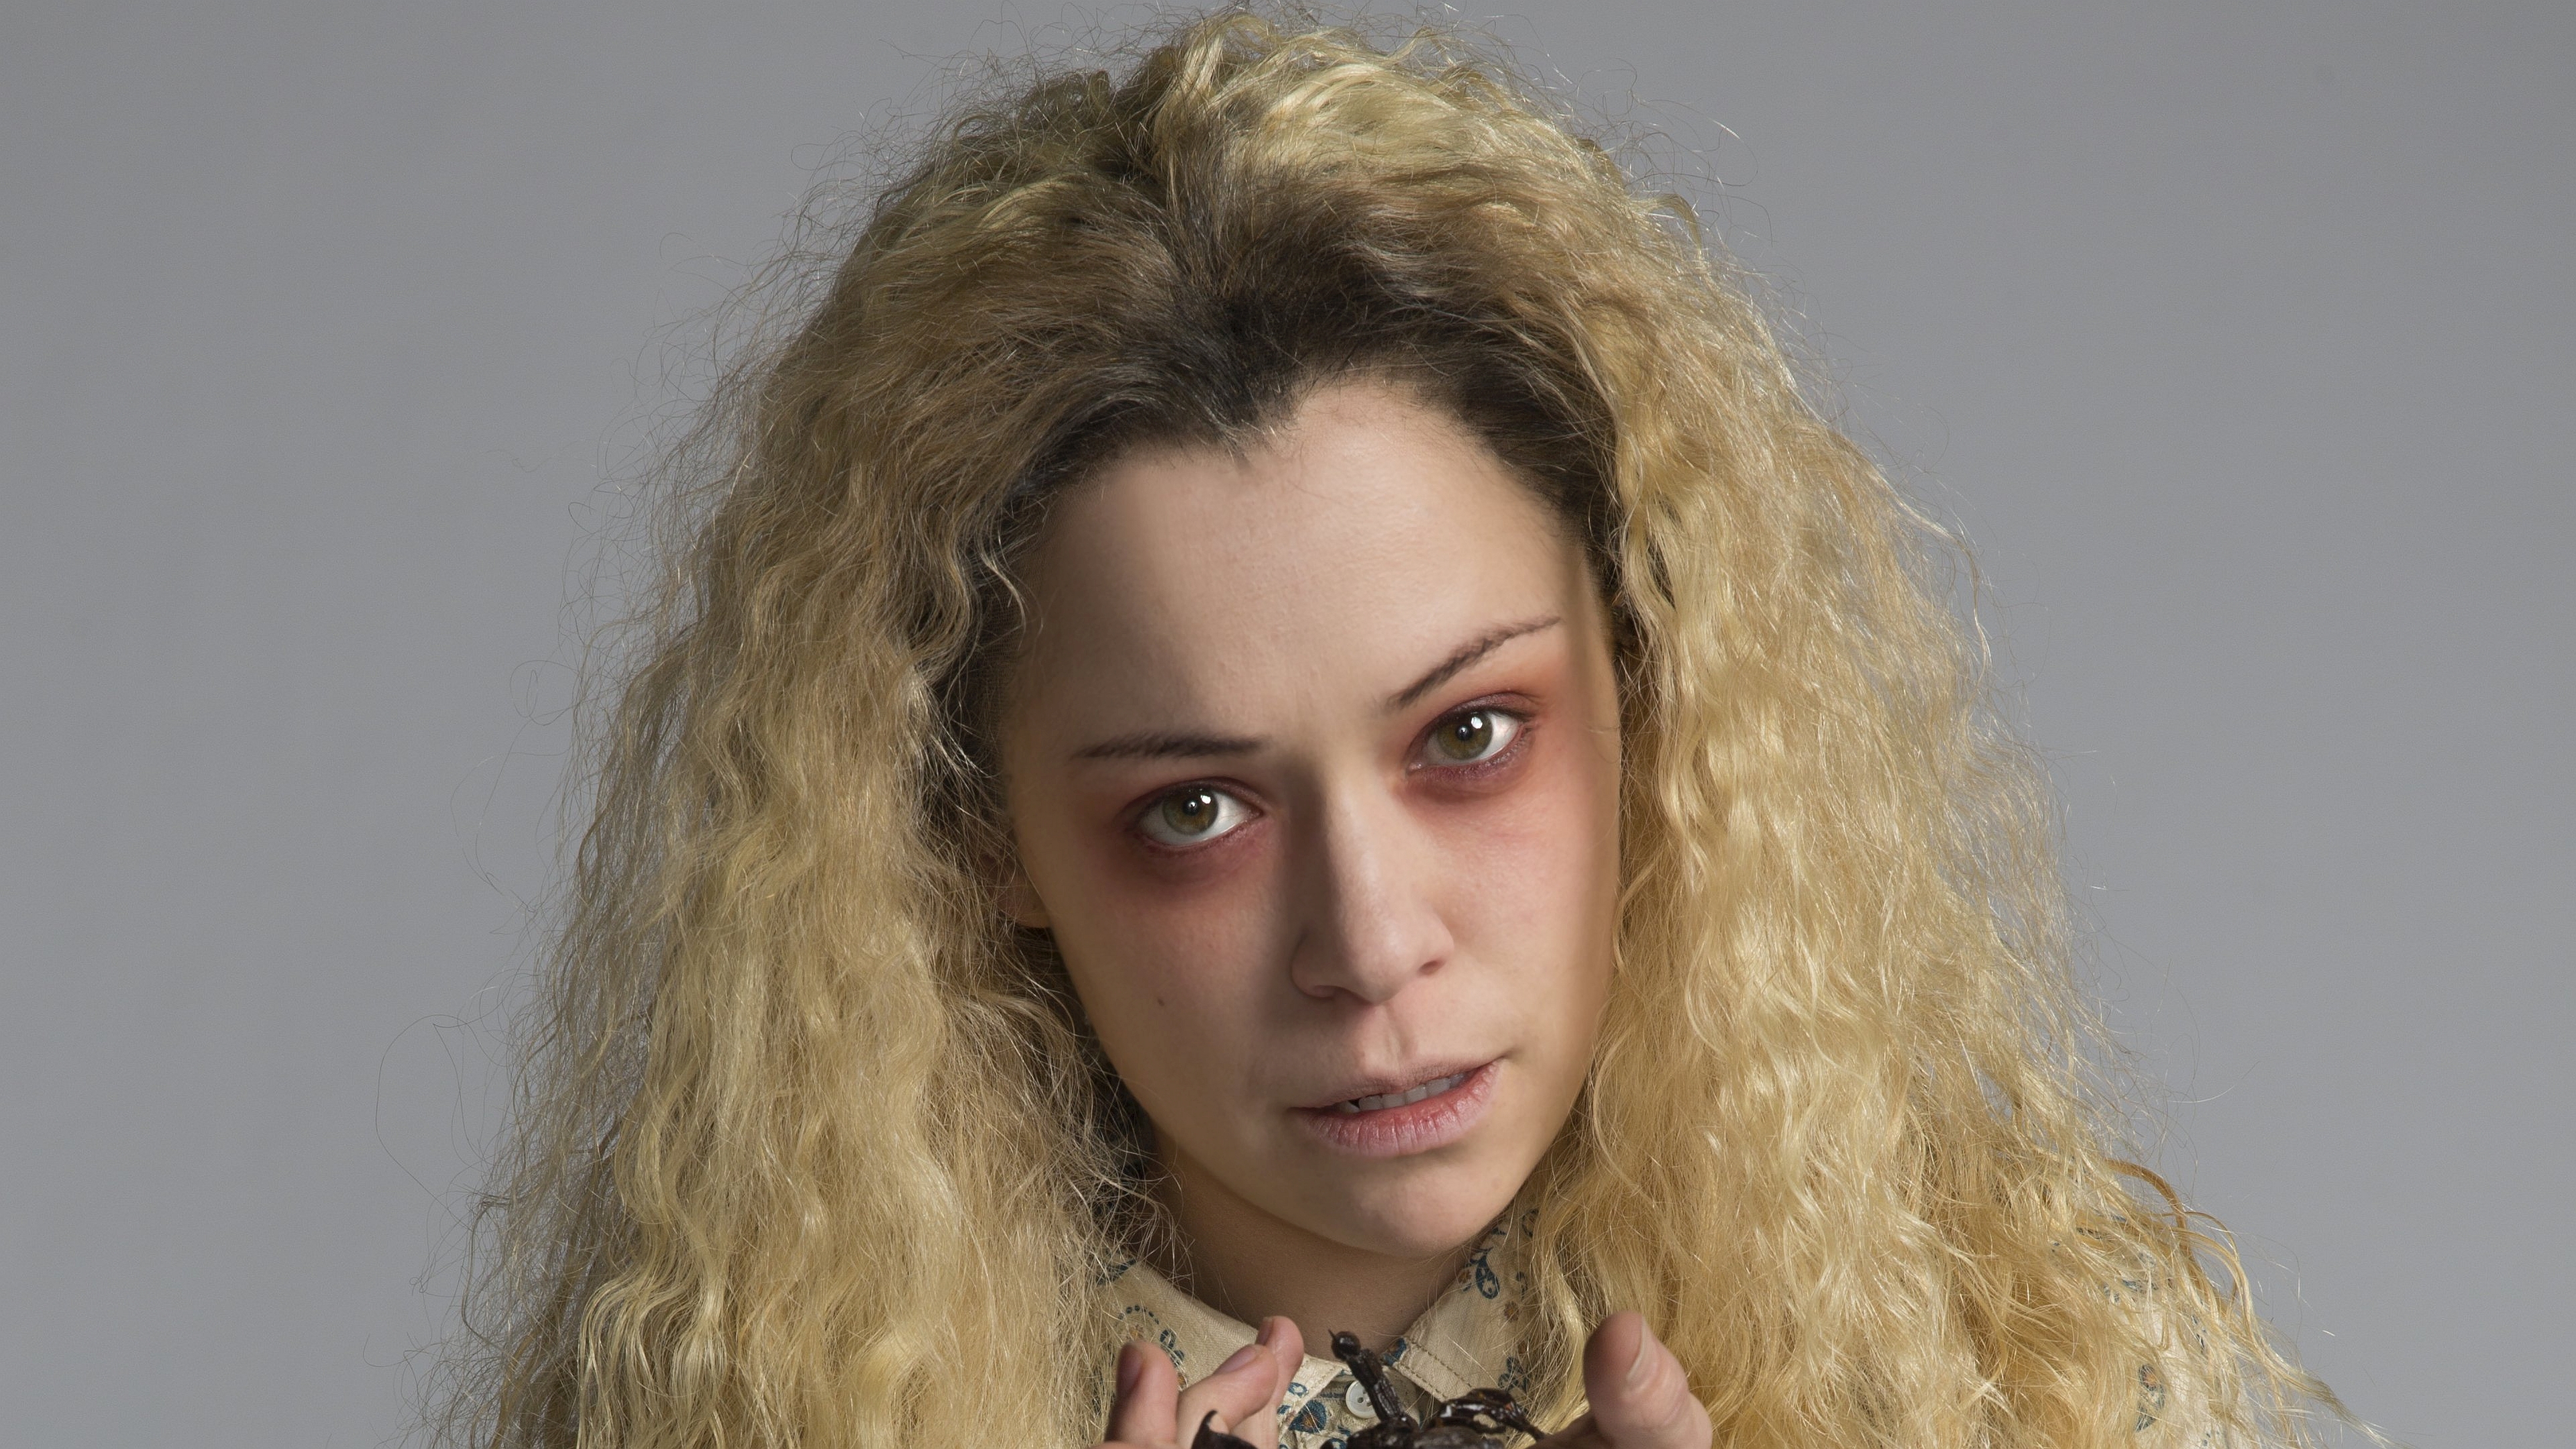 Download mobile wallpaper Tv Show, Orphan Black for free.